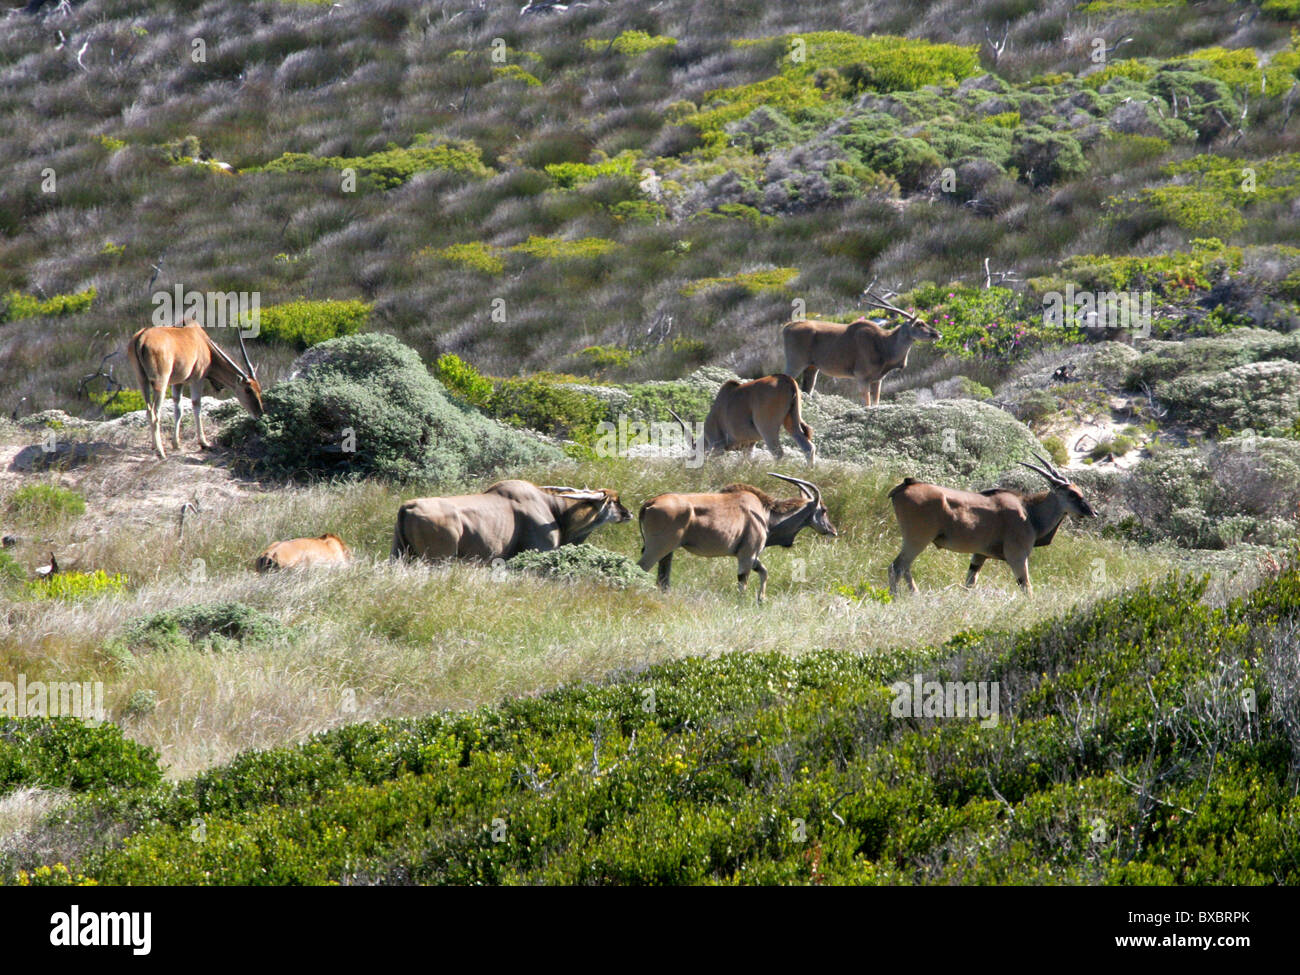 A Group of Seven Common or Southern Eland, Taurotragus oryx, at Cape Point, Cape Peninsular, South Africa. Stock Photo